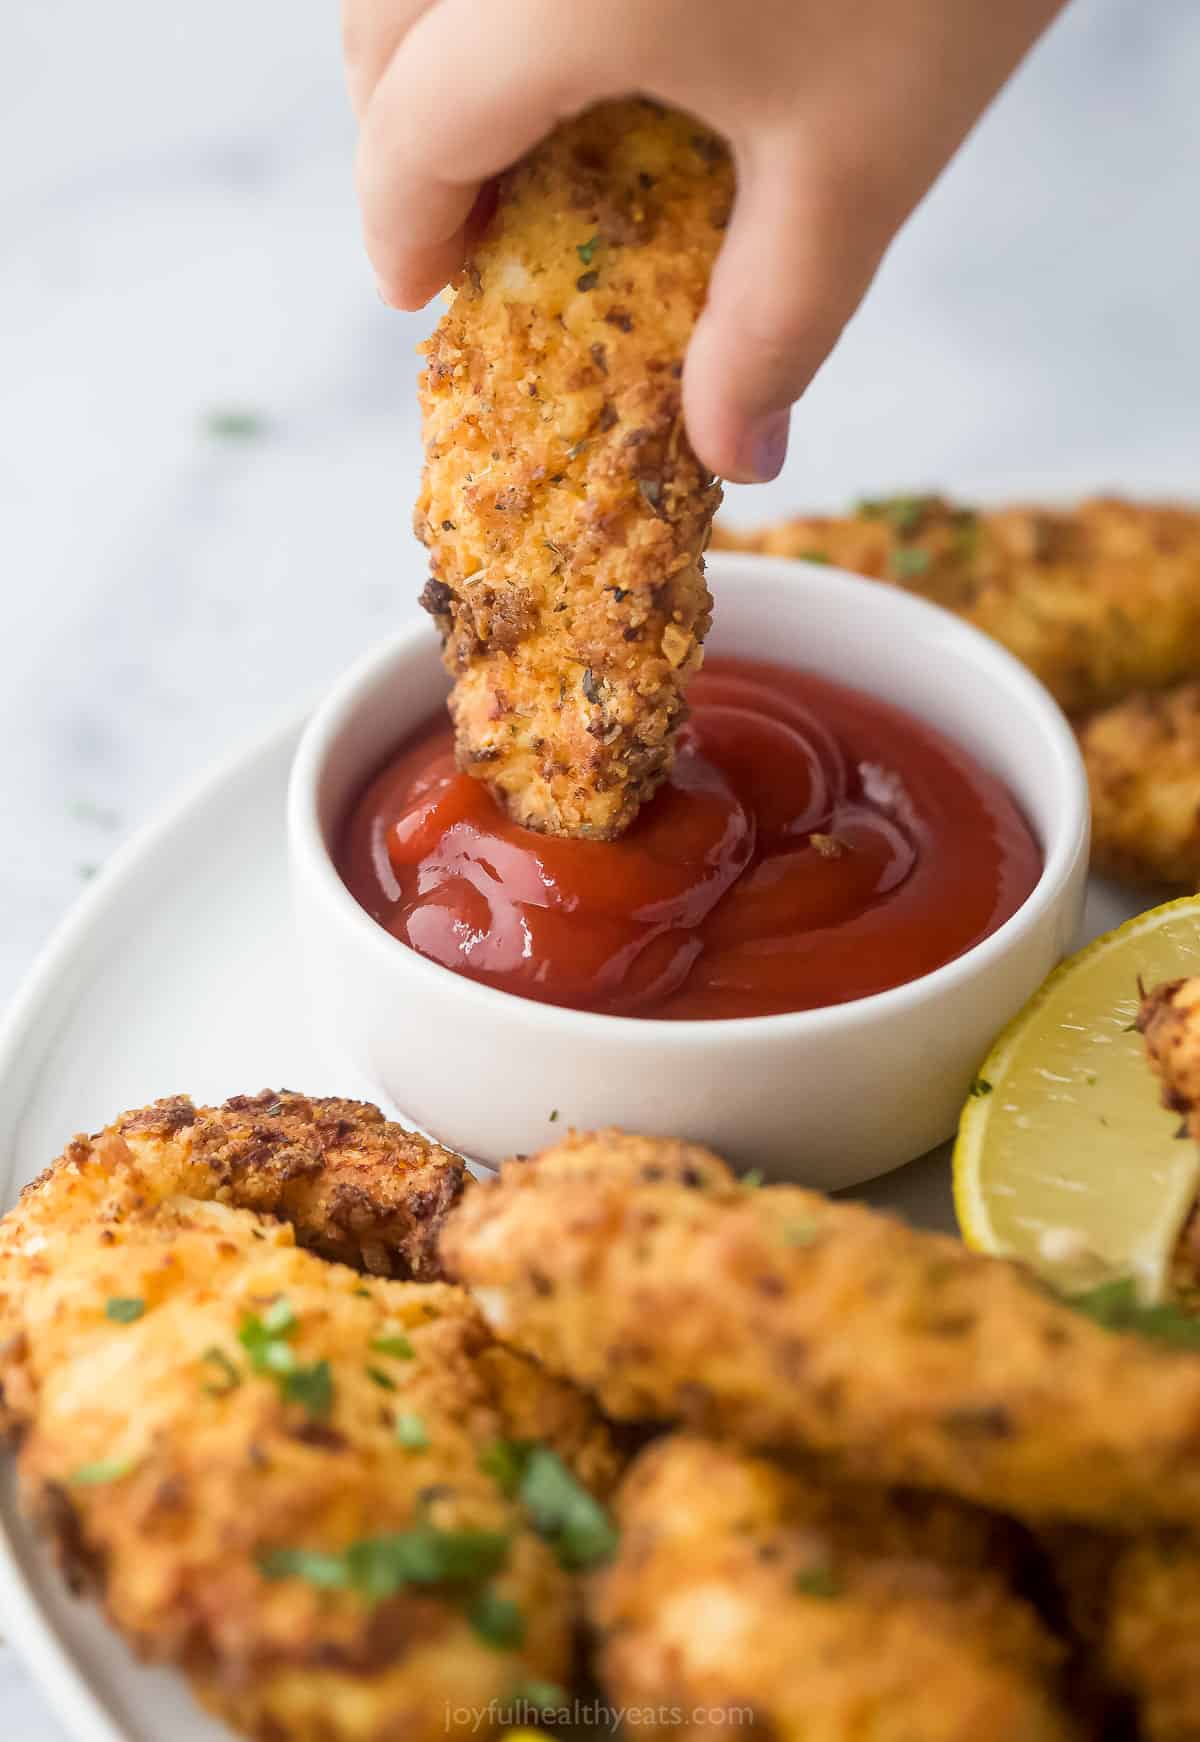 A homemade chicken tender being dunked into a small dish of ketchup